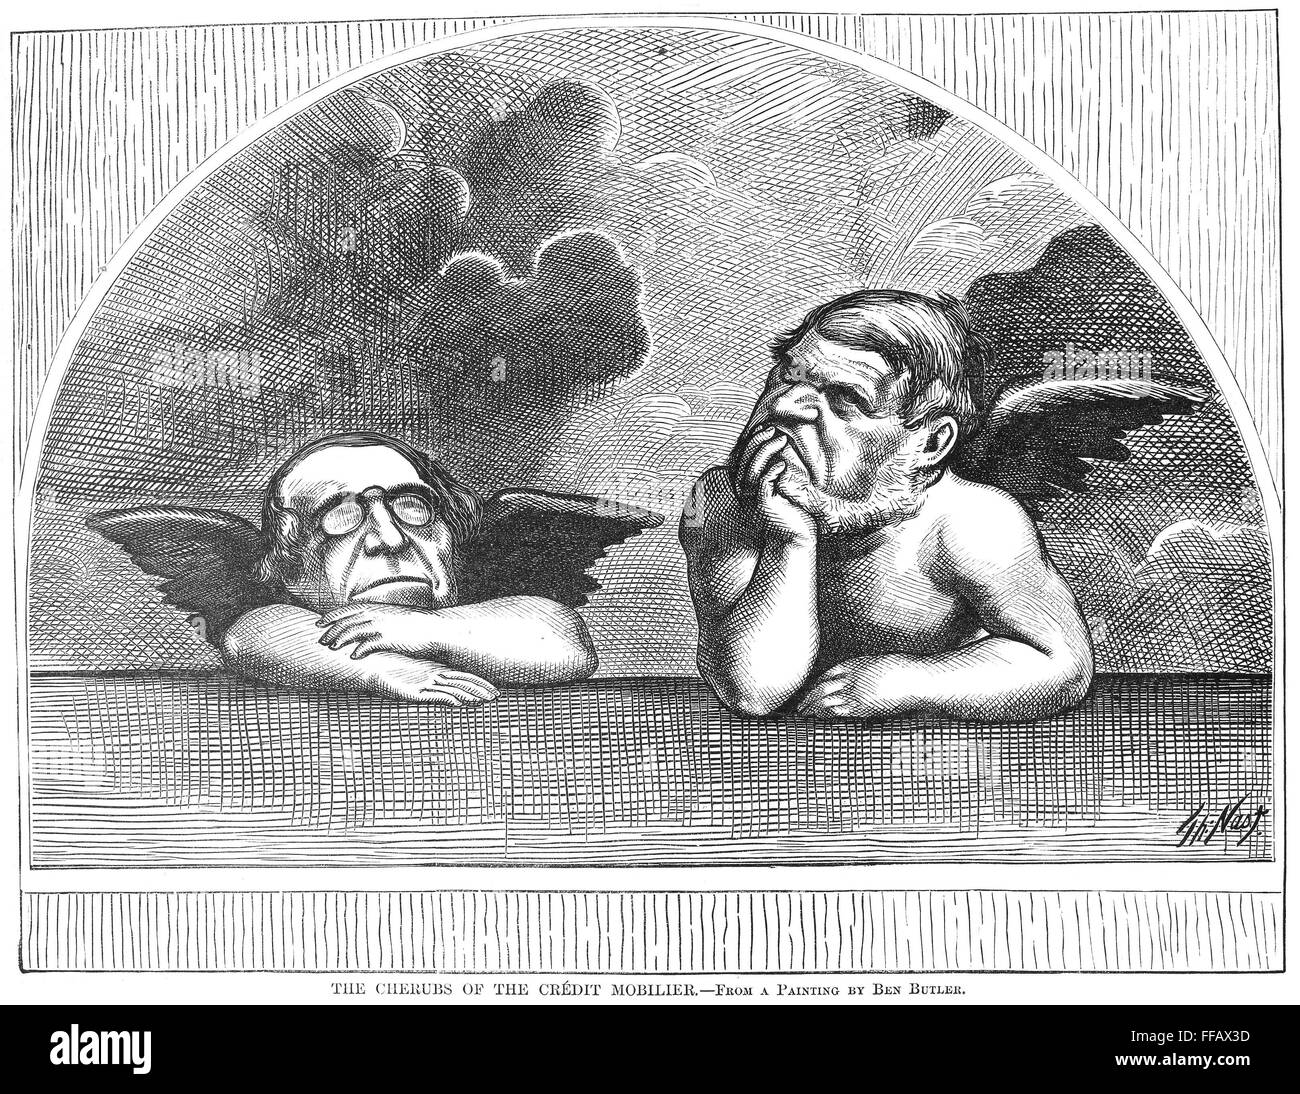 CREDIT MOBILIER SCANDAL. /n'The Cherubs of the Credit Mobilier.' Cartoon, 1873, by Thomas Nast on the censure by the House of Representatives of Congressman James Brooks of New York (left) and Oakes Ames of Massachusetts for their involvement in the Credi Stock Photo